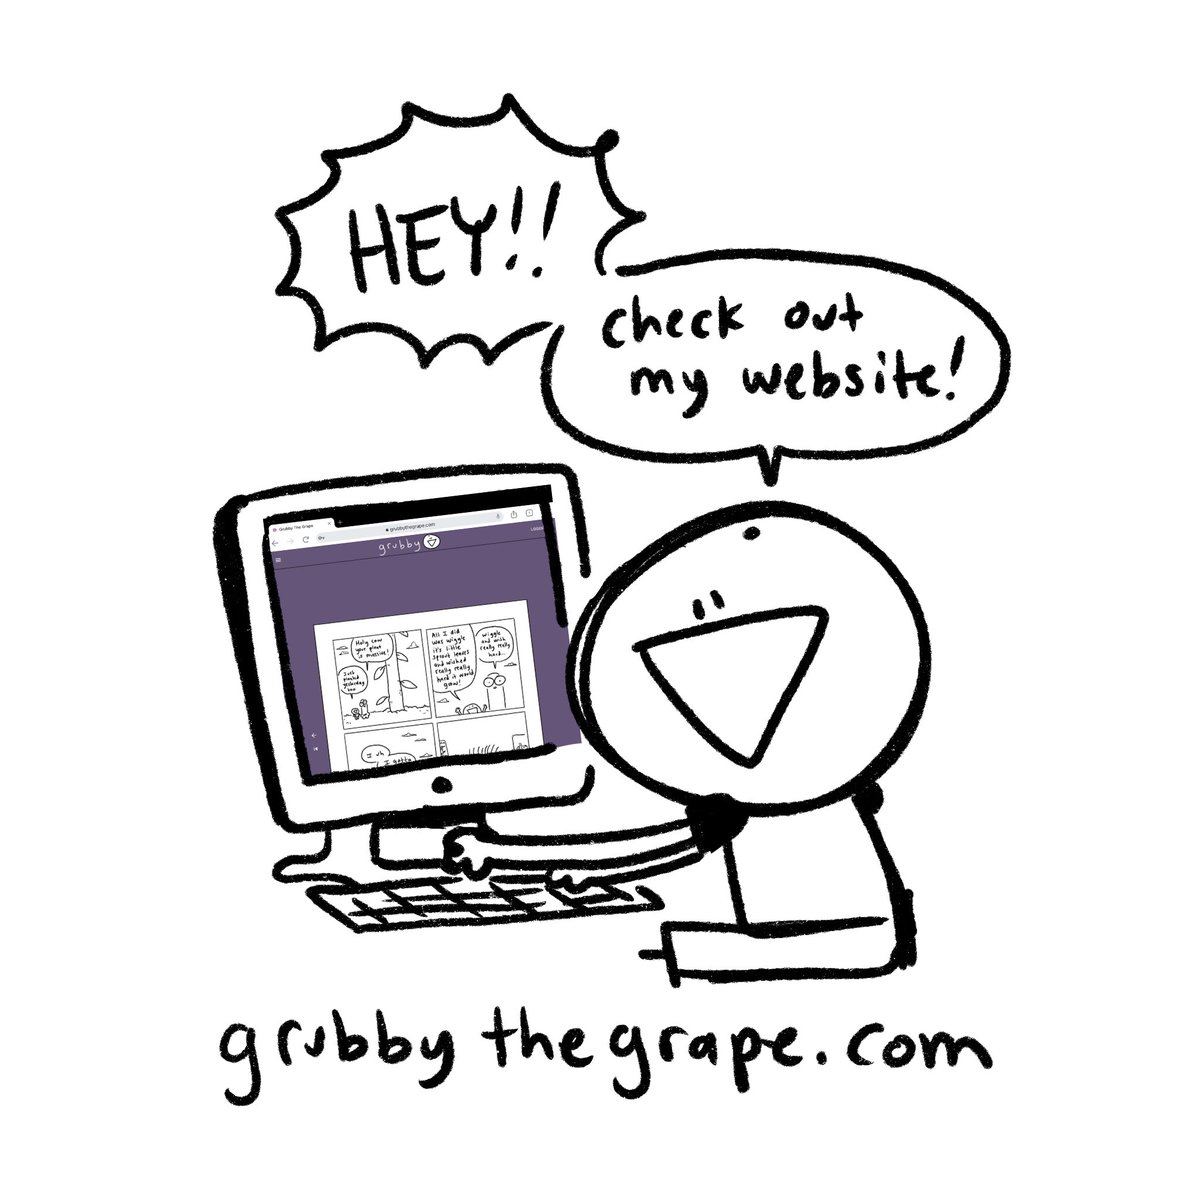 GRUBBY'S WEBSITE GOT A MAKEOVER!!

Go check it out and explore the entire collection of Grubby the Grape comics, maybe even chuckle a little if you're feeling frisky, and share with your friends!!

https://t.co/wUjAZABmfN
https://t.co/wUjAZABmfN
https://t.co/wUjAZABmfN 